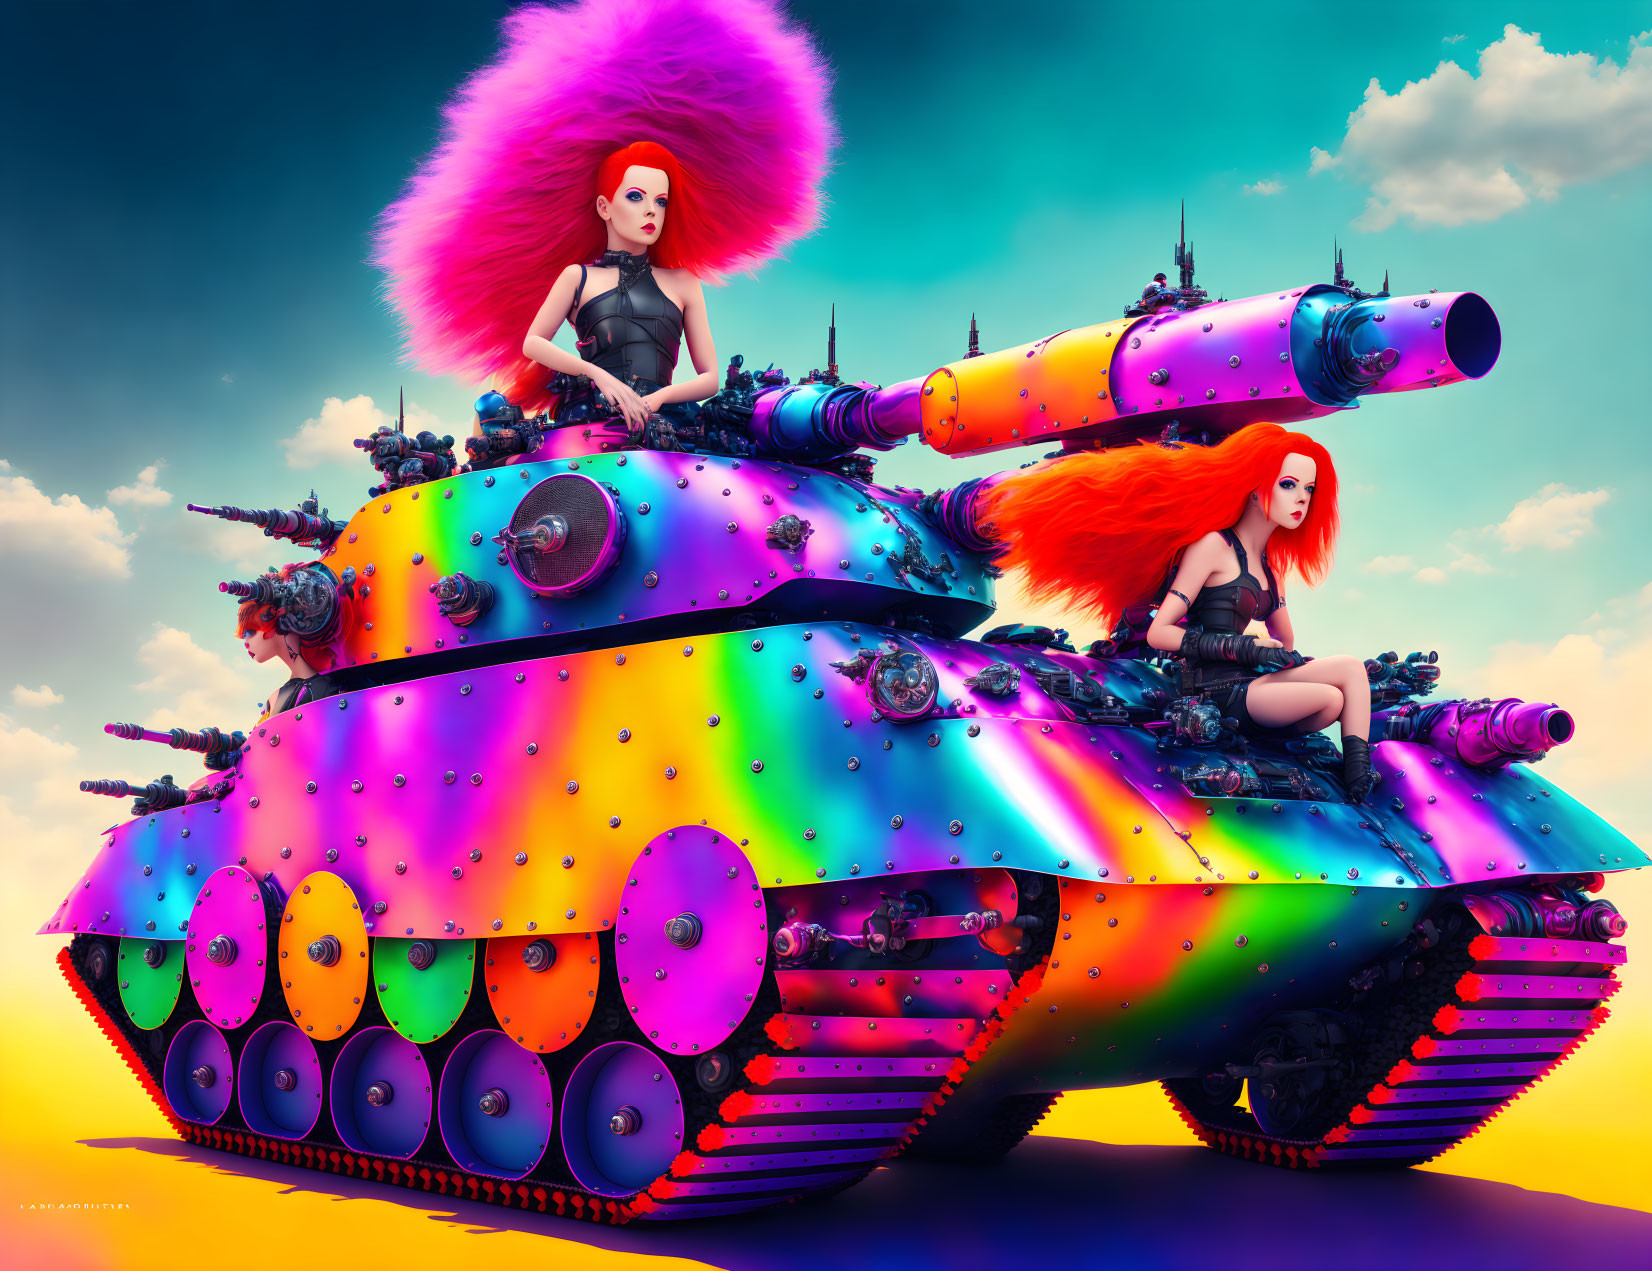 Colorful psychedelic tank with two women and vibrant hair against gradient sky